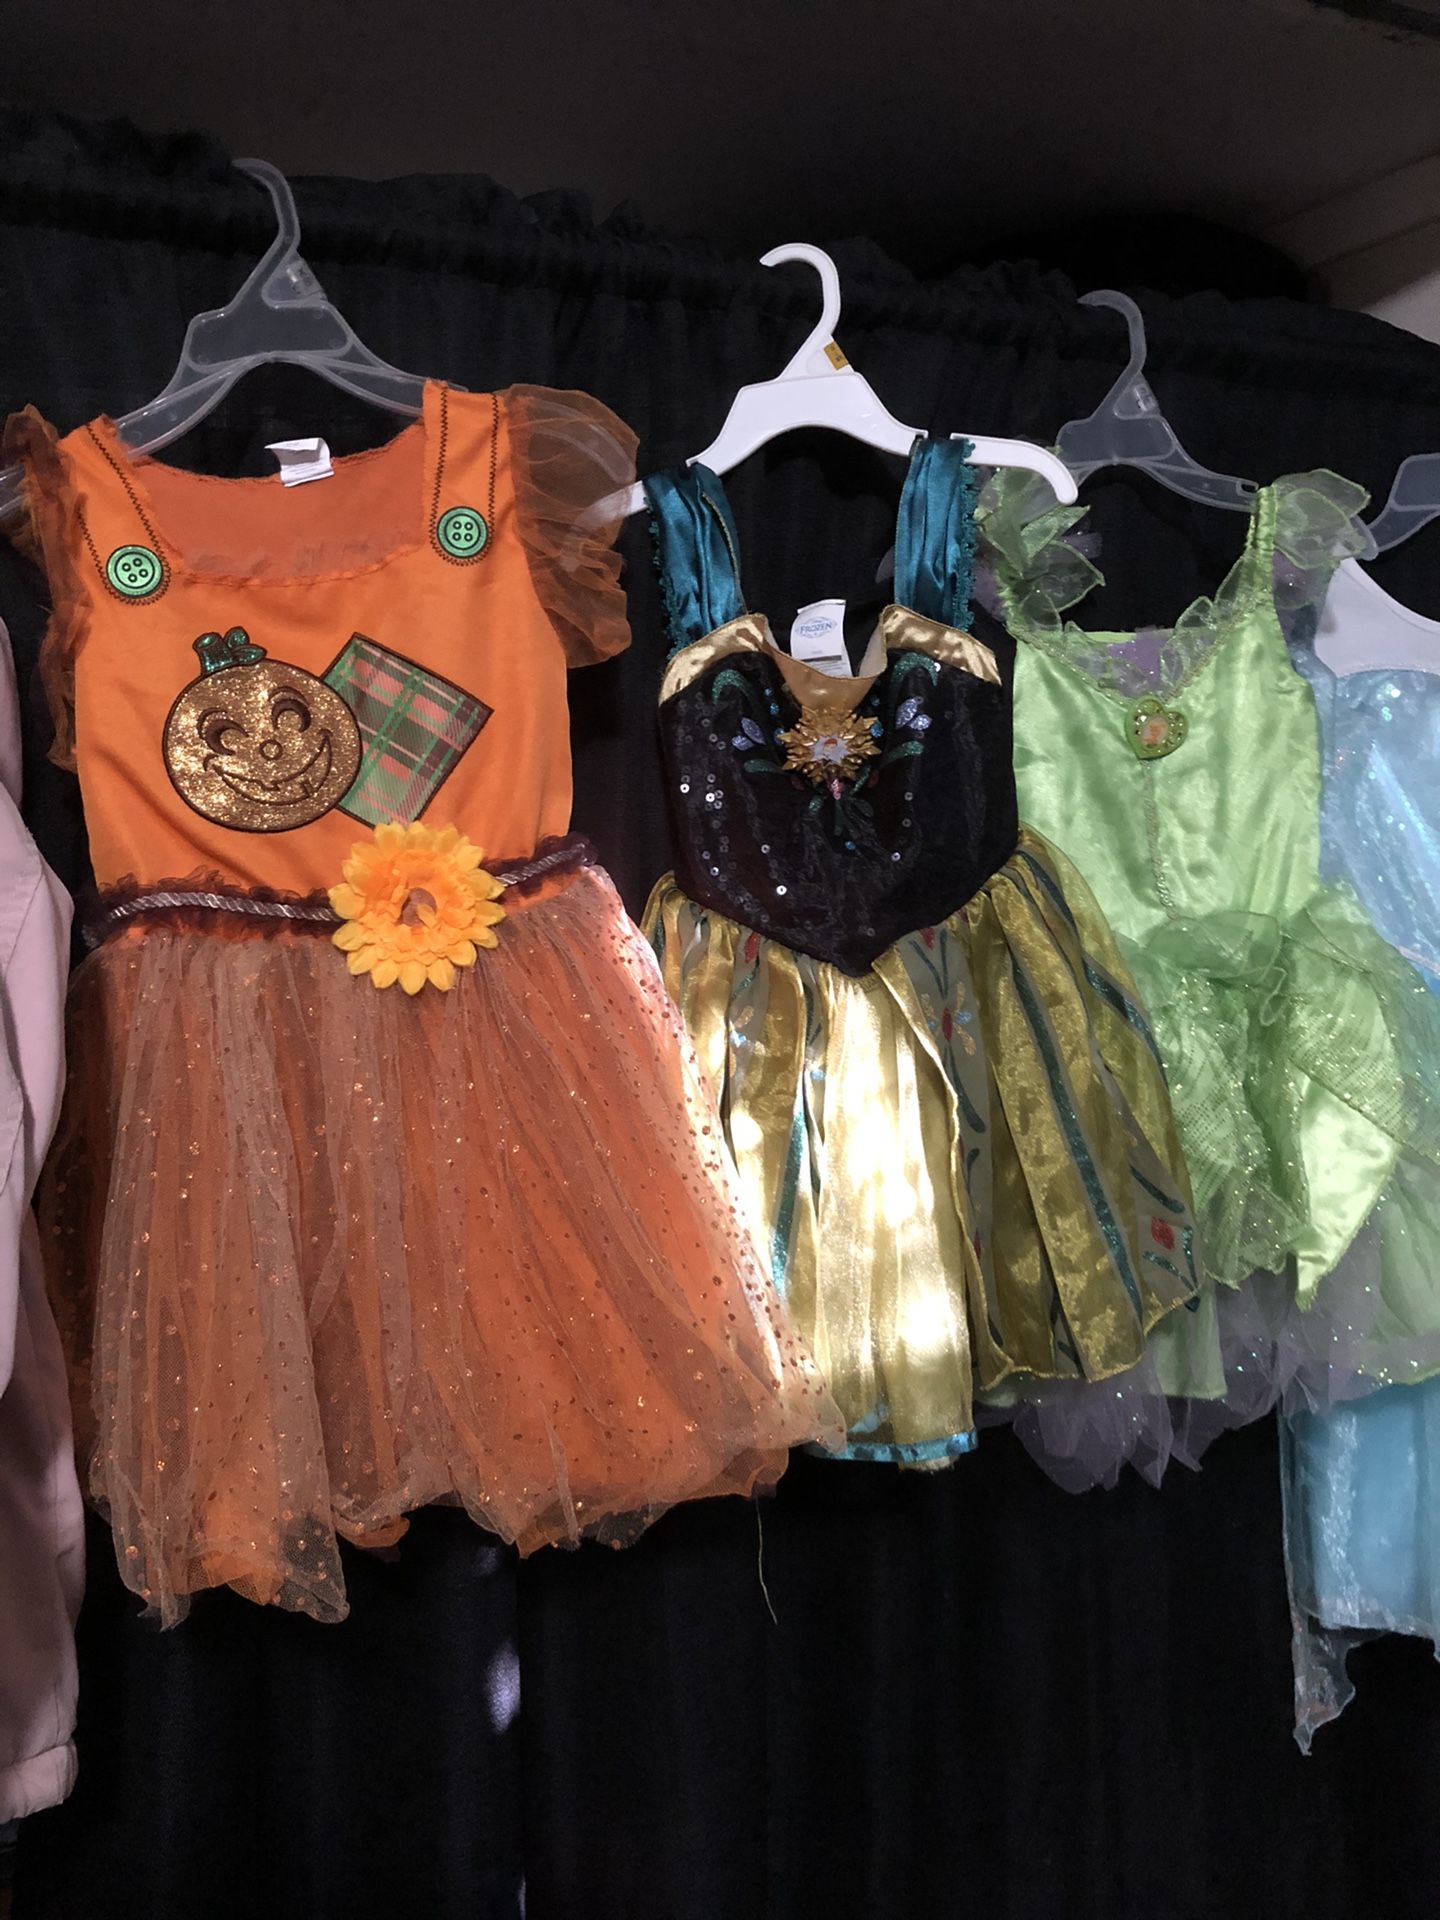 Scare crow Anna (from frozen) tinker bell costumes. Toddler size 3-5 sold as is. No extra accessories. $10 each. Girl costumes. Princess costumes.